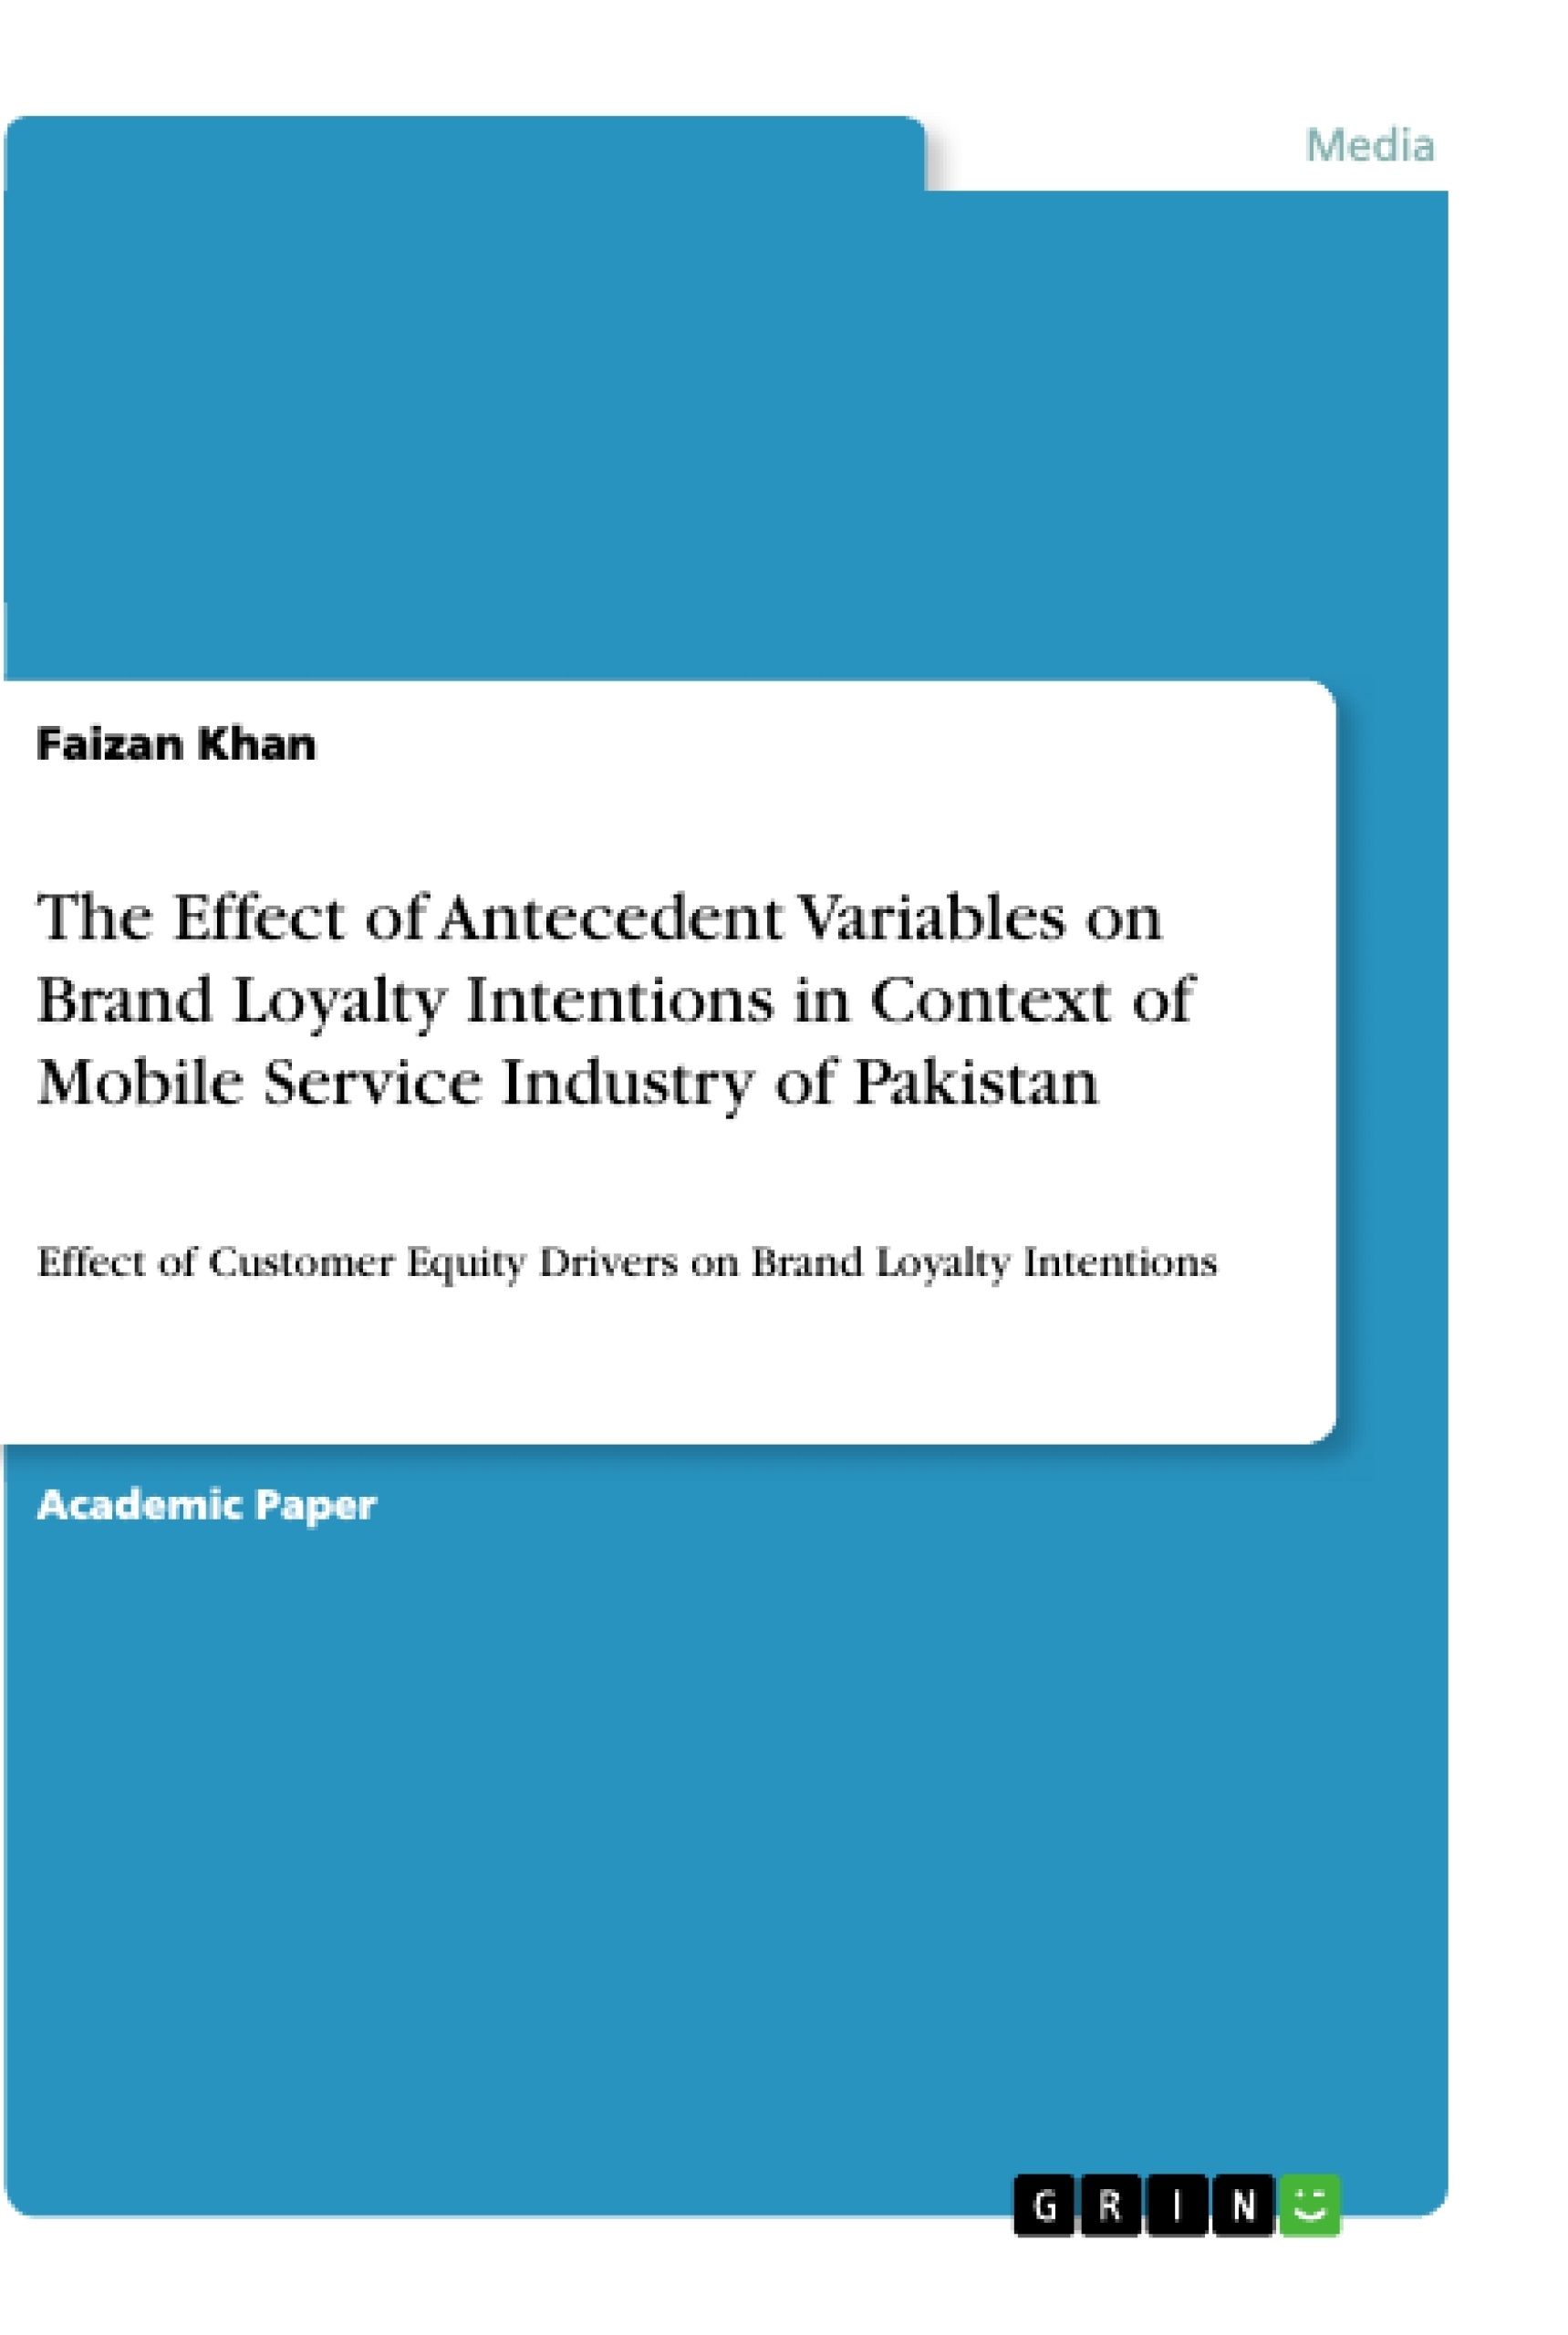 Title: The Effect of Antecedent Variables on Brand Loyalty Intentions in Context of Mobile Service Industry of Pakistan